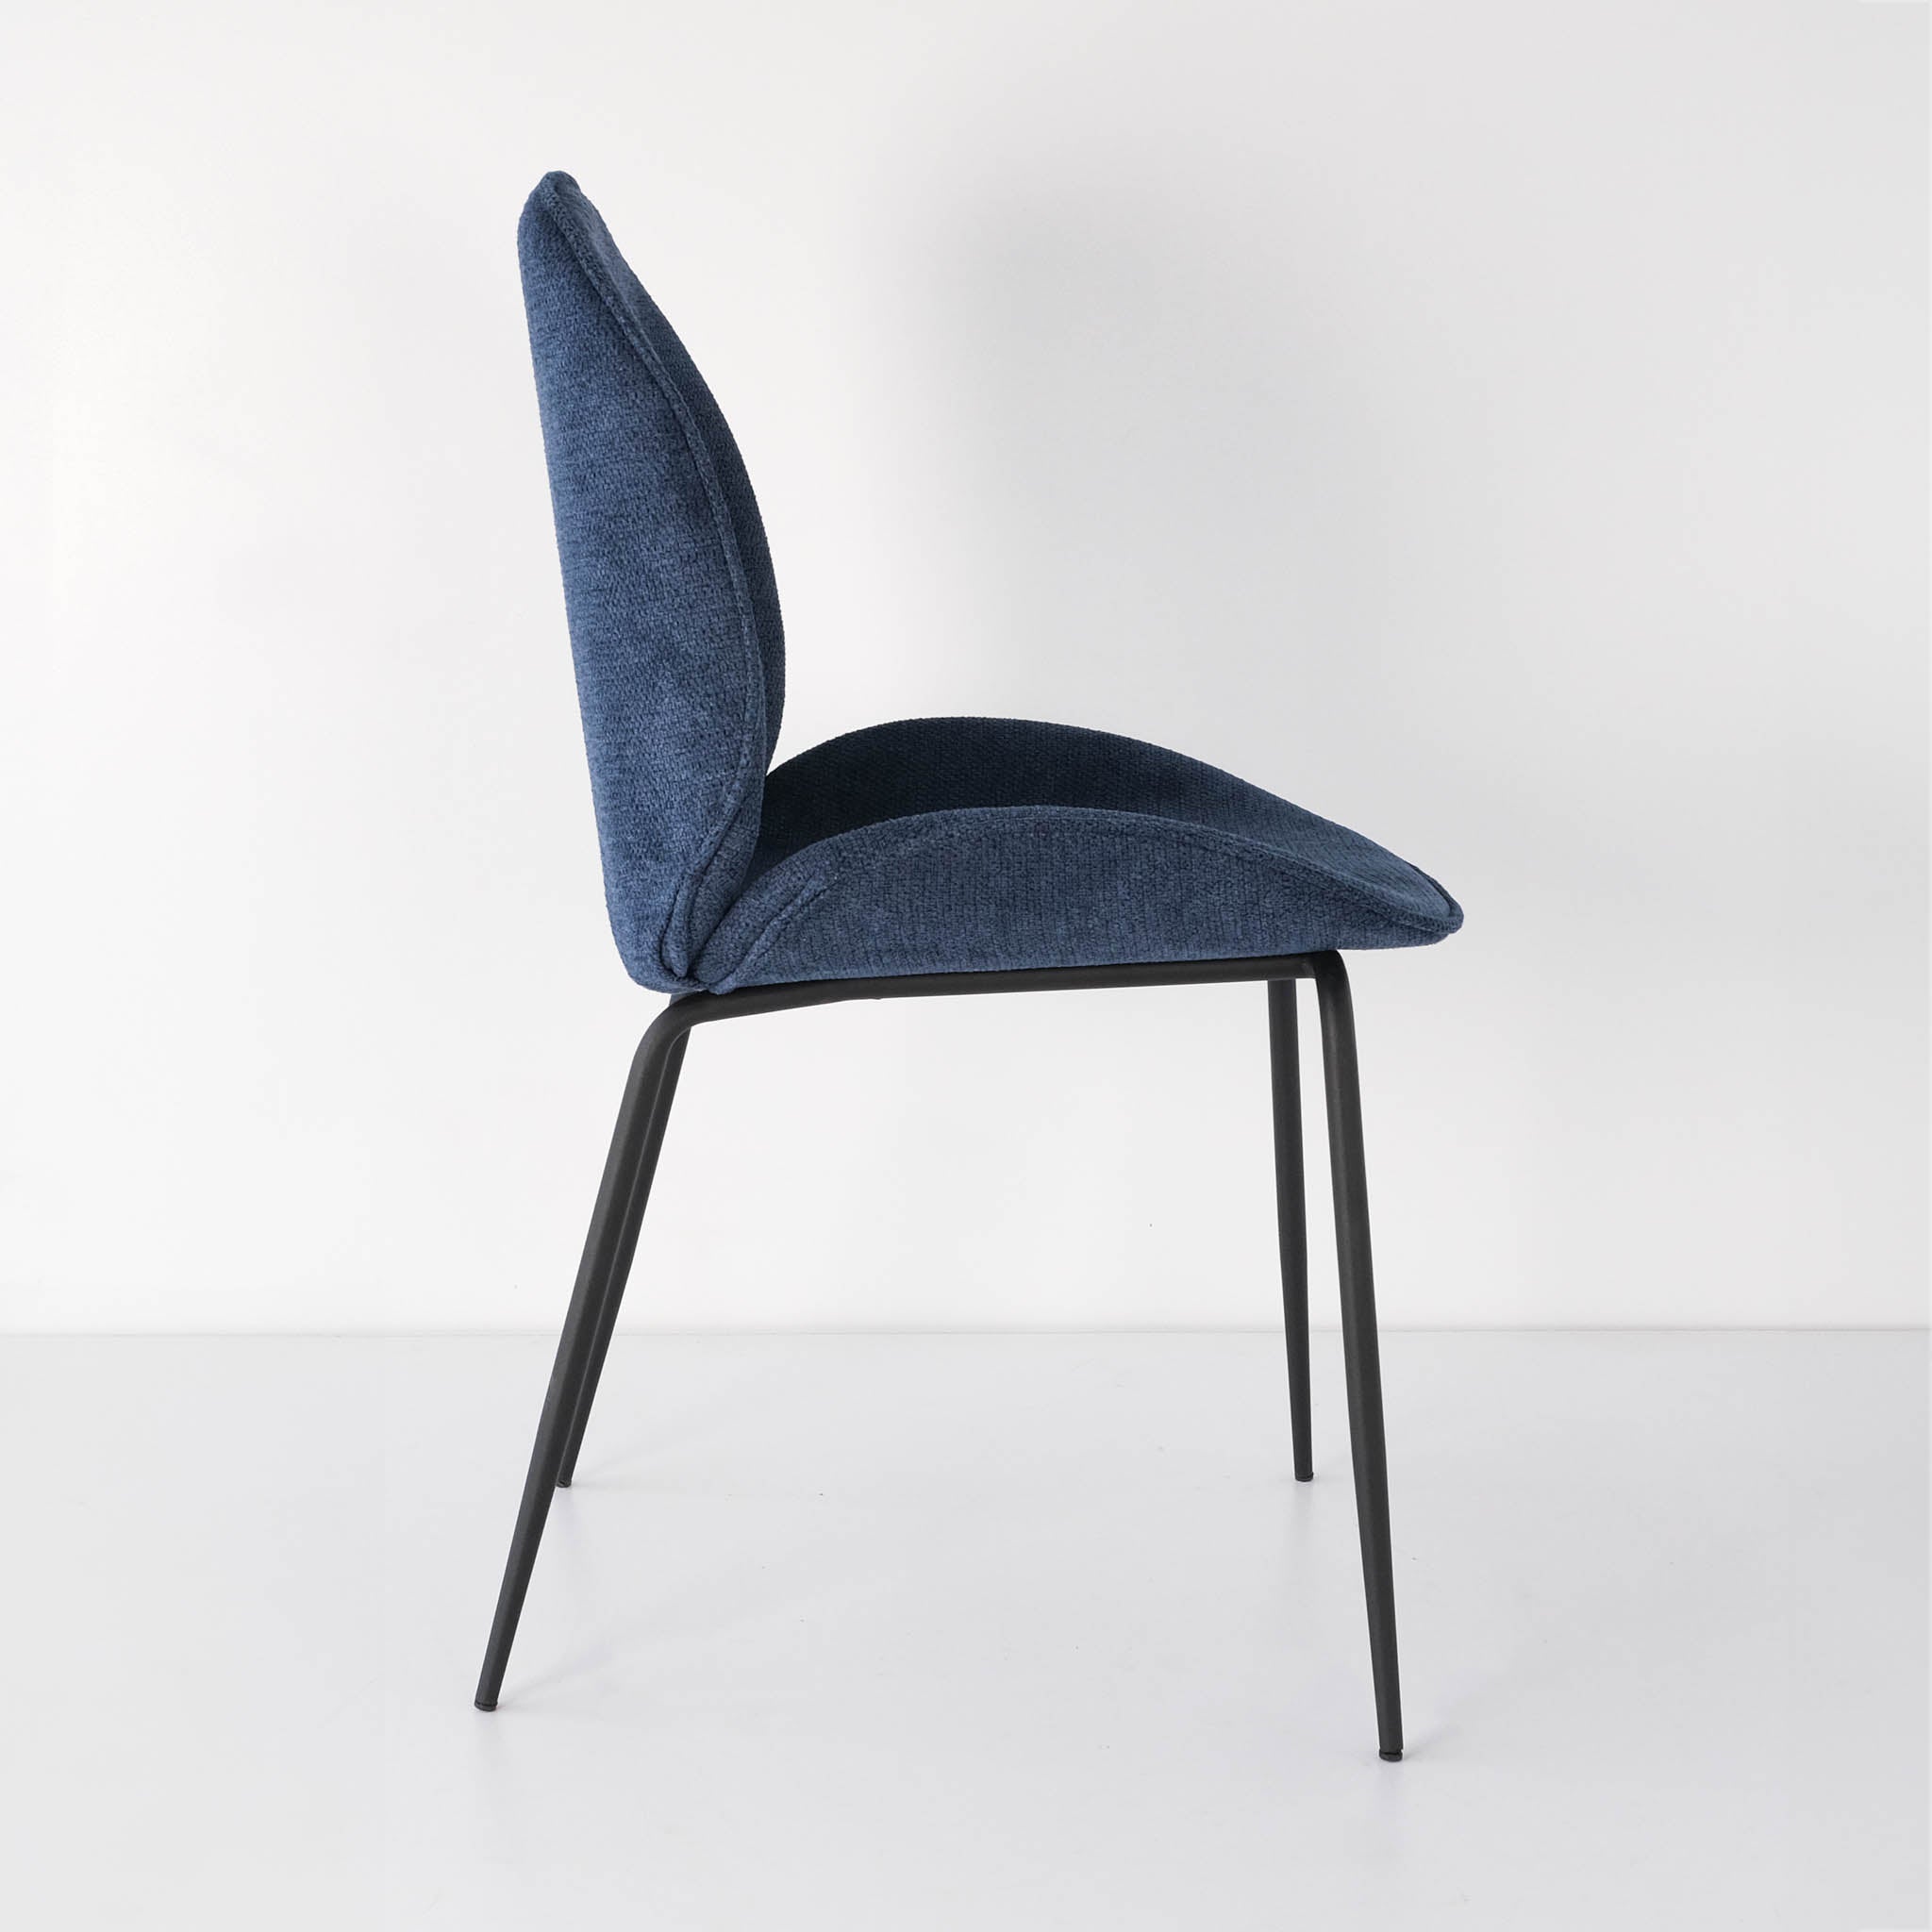 Side view of a vibrant and elegant royal blue Beetle dining chair